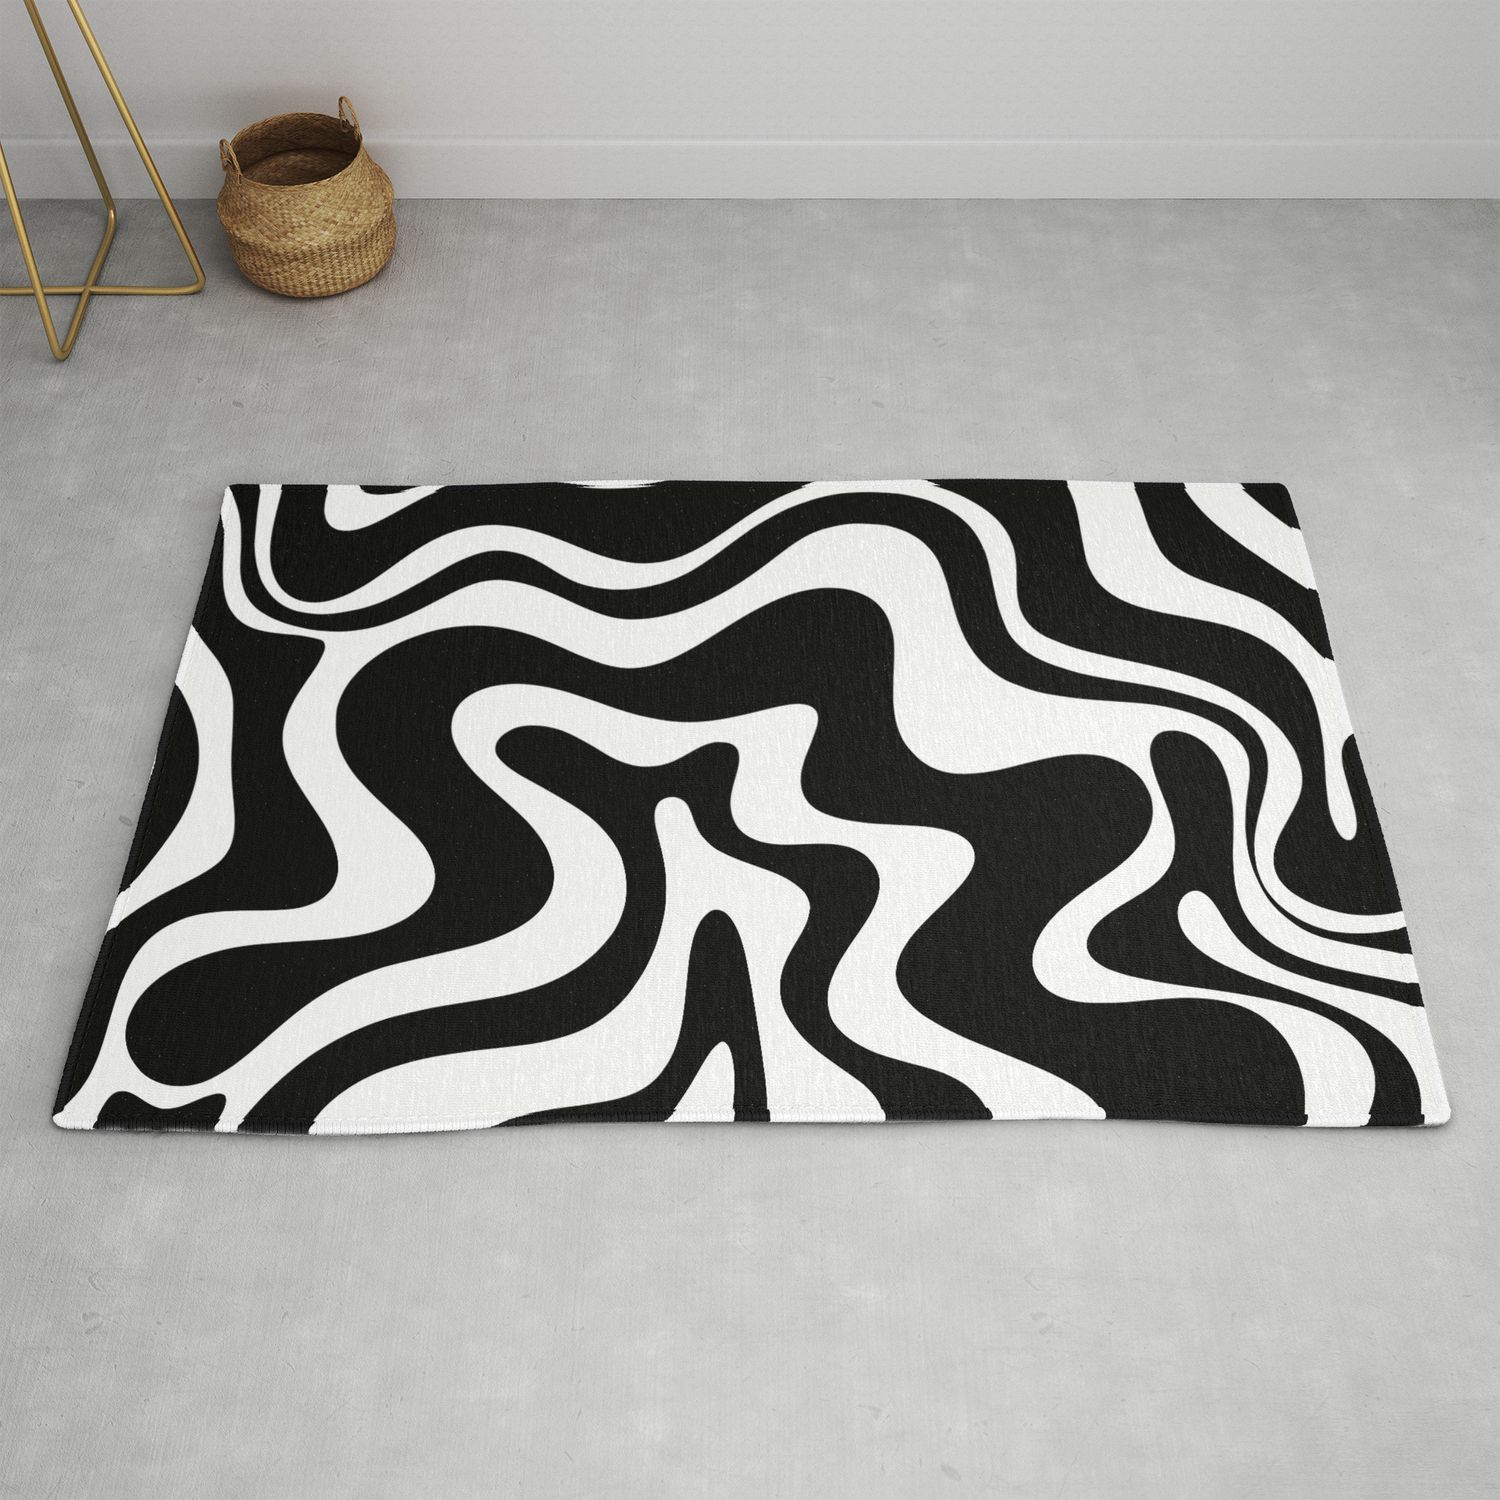 Liquid Swirl Abstract Pattern In Black And White Rugkierkegaard Design  Studio | Society6 Intended For Black And White Rugs (View 15 of 15)